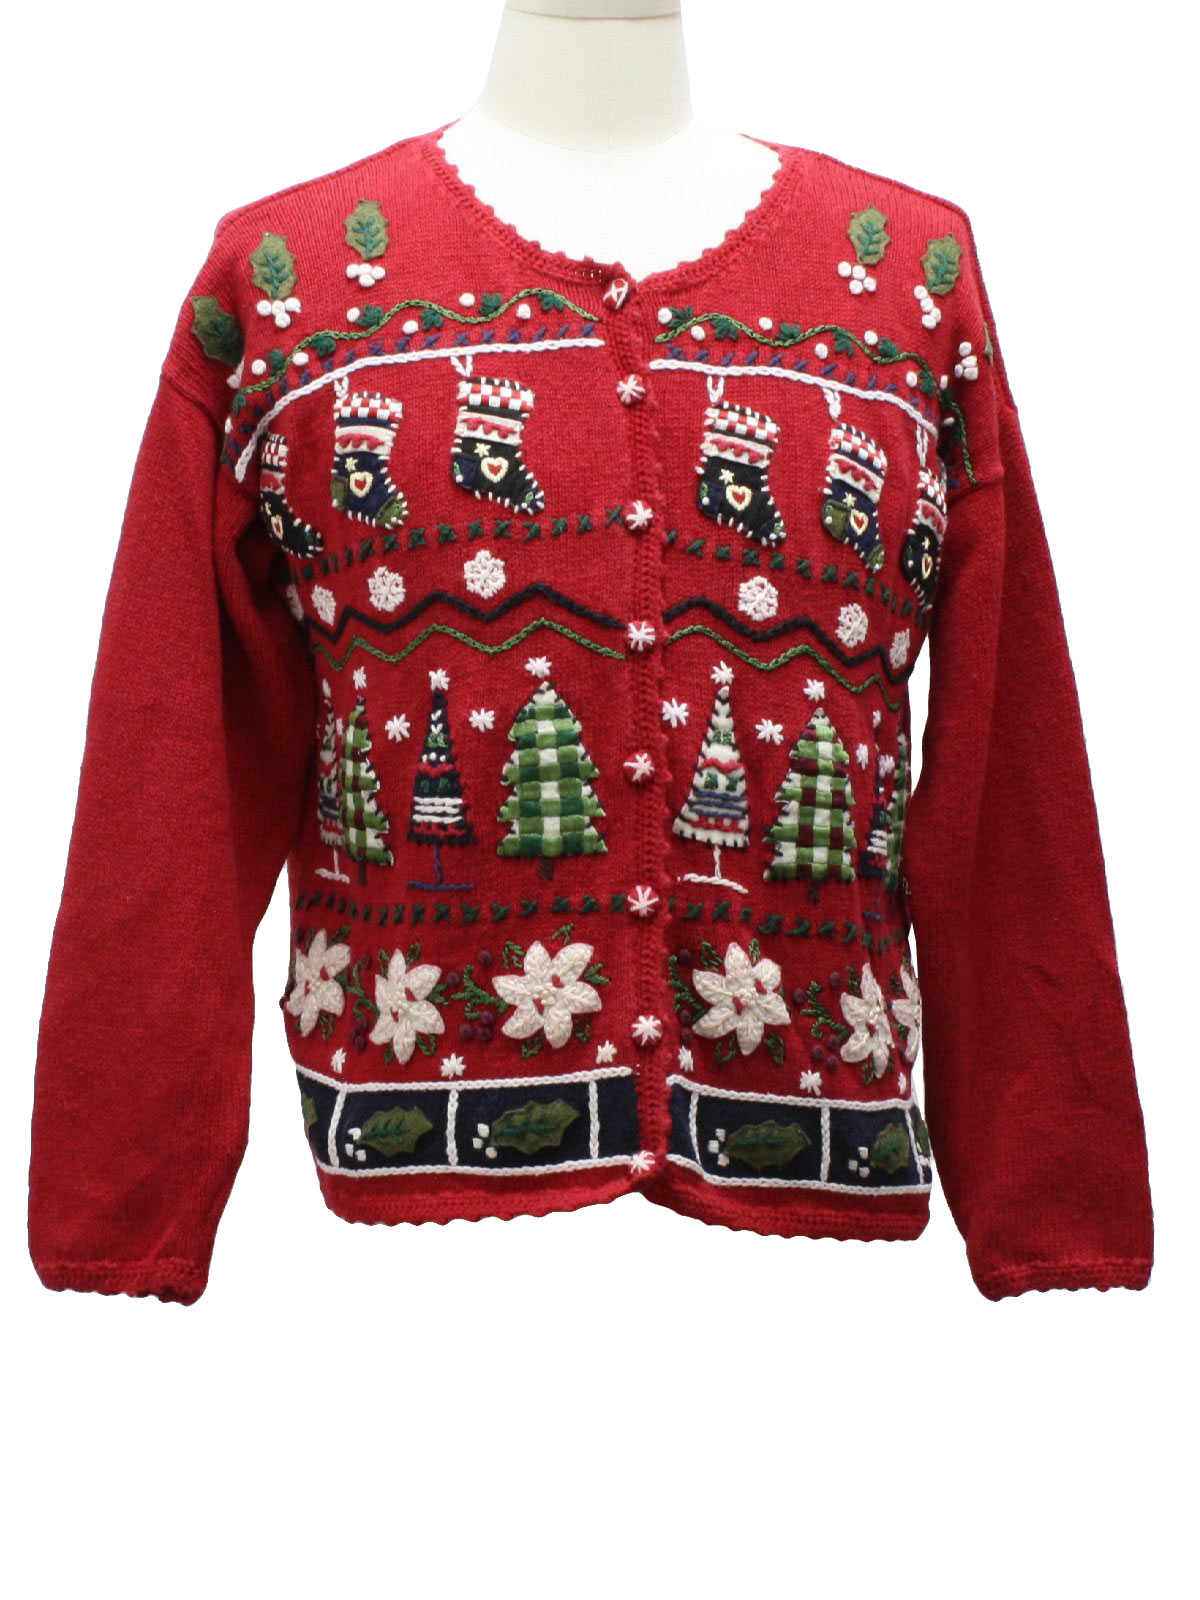 Womens Ugly Christmas Sweater: -Carly St. Claire- Womens red background ...